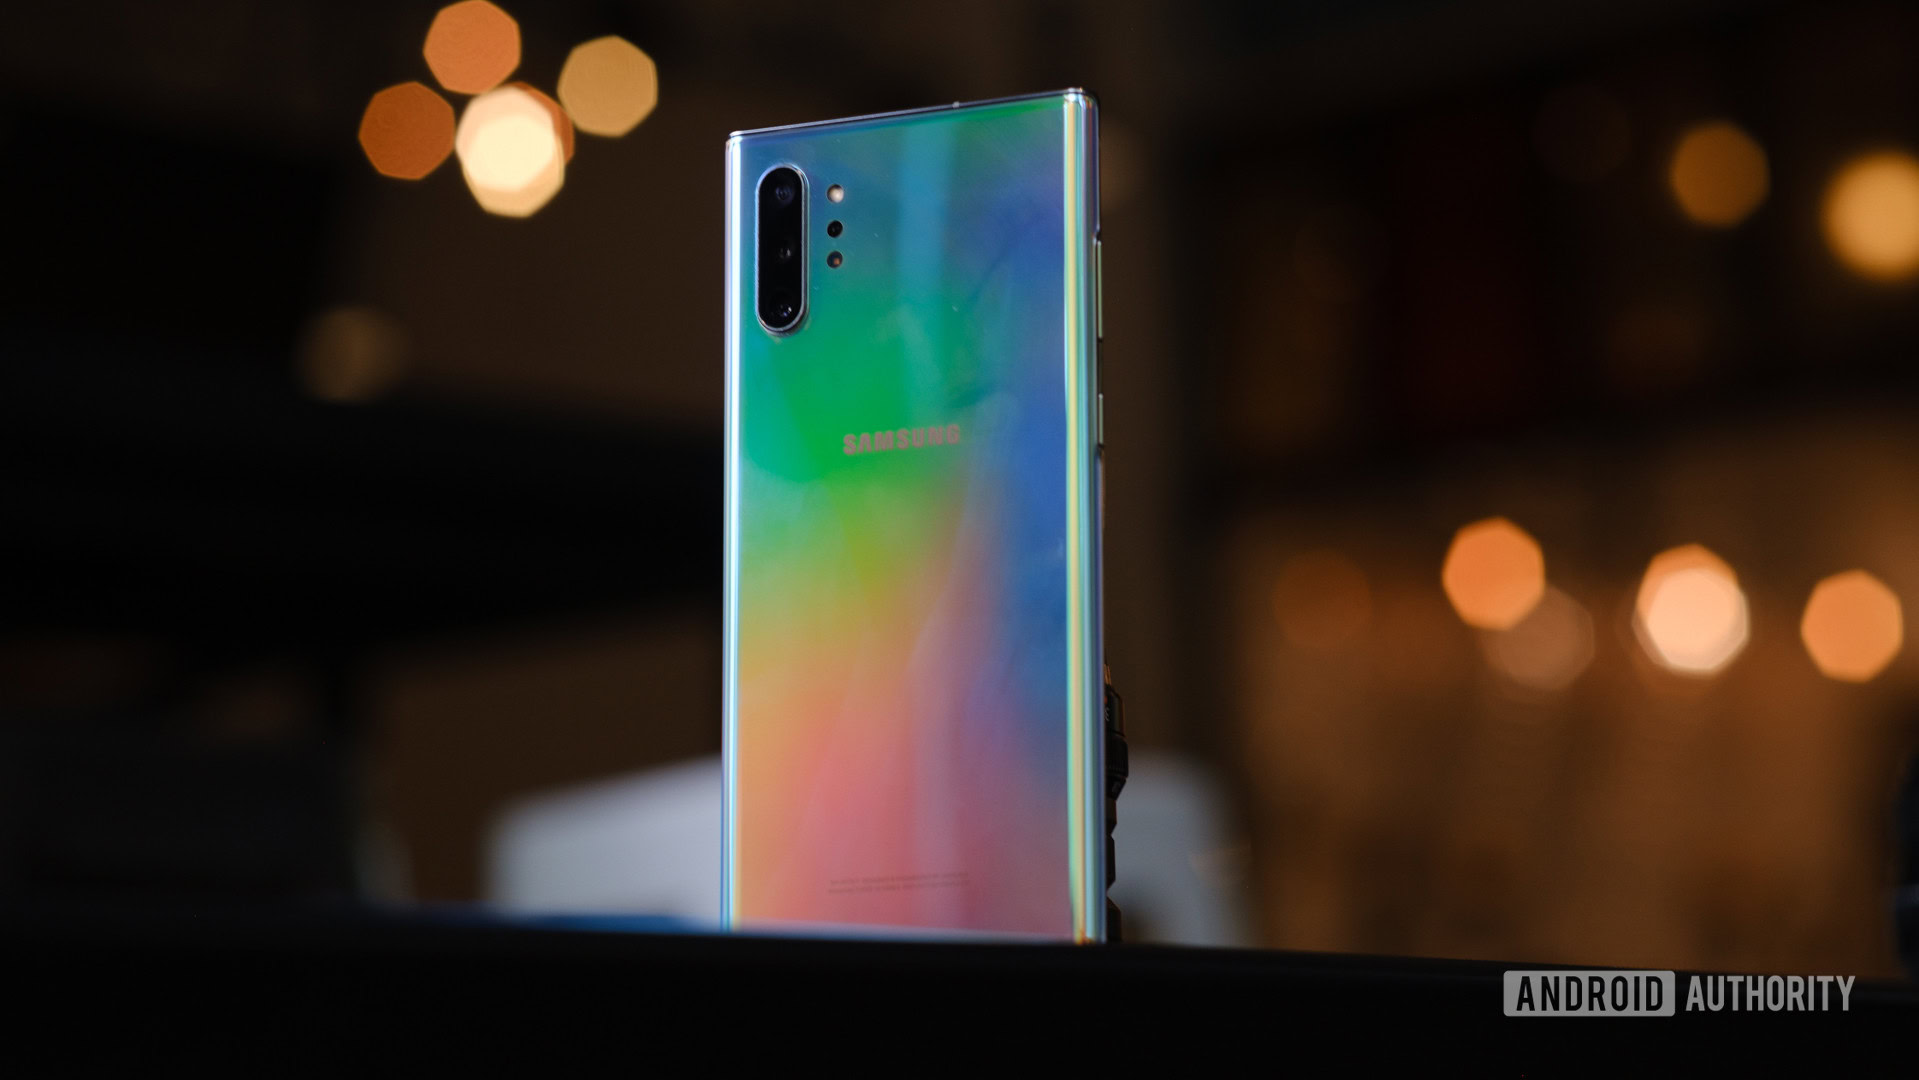 The Galaxy Note 10 Lite could be Samsung's new midrange colossus